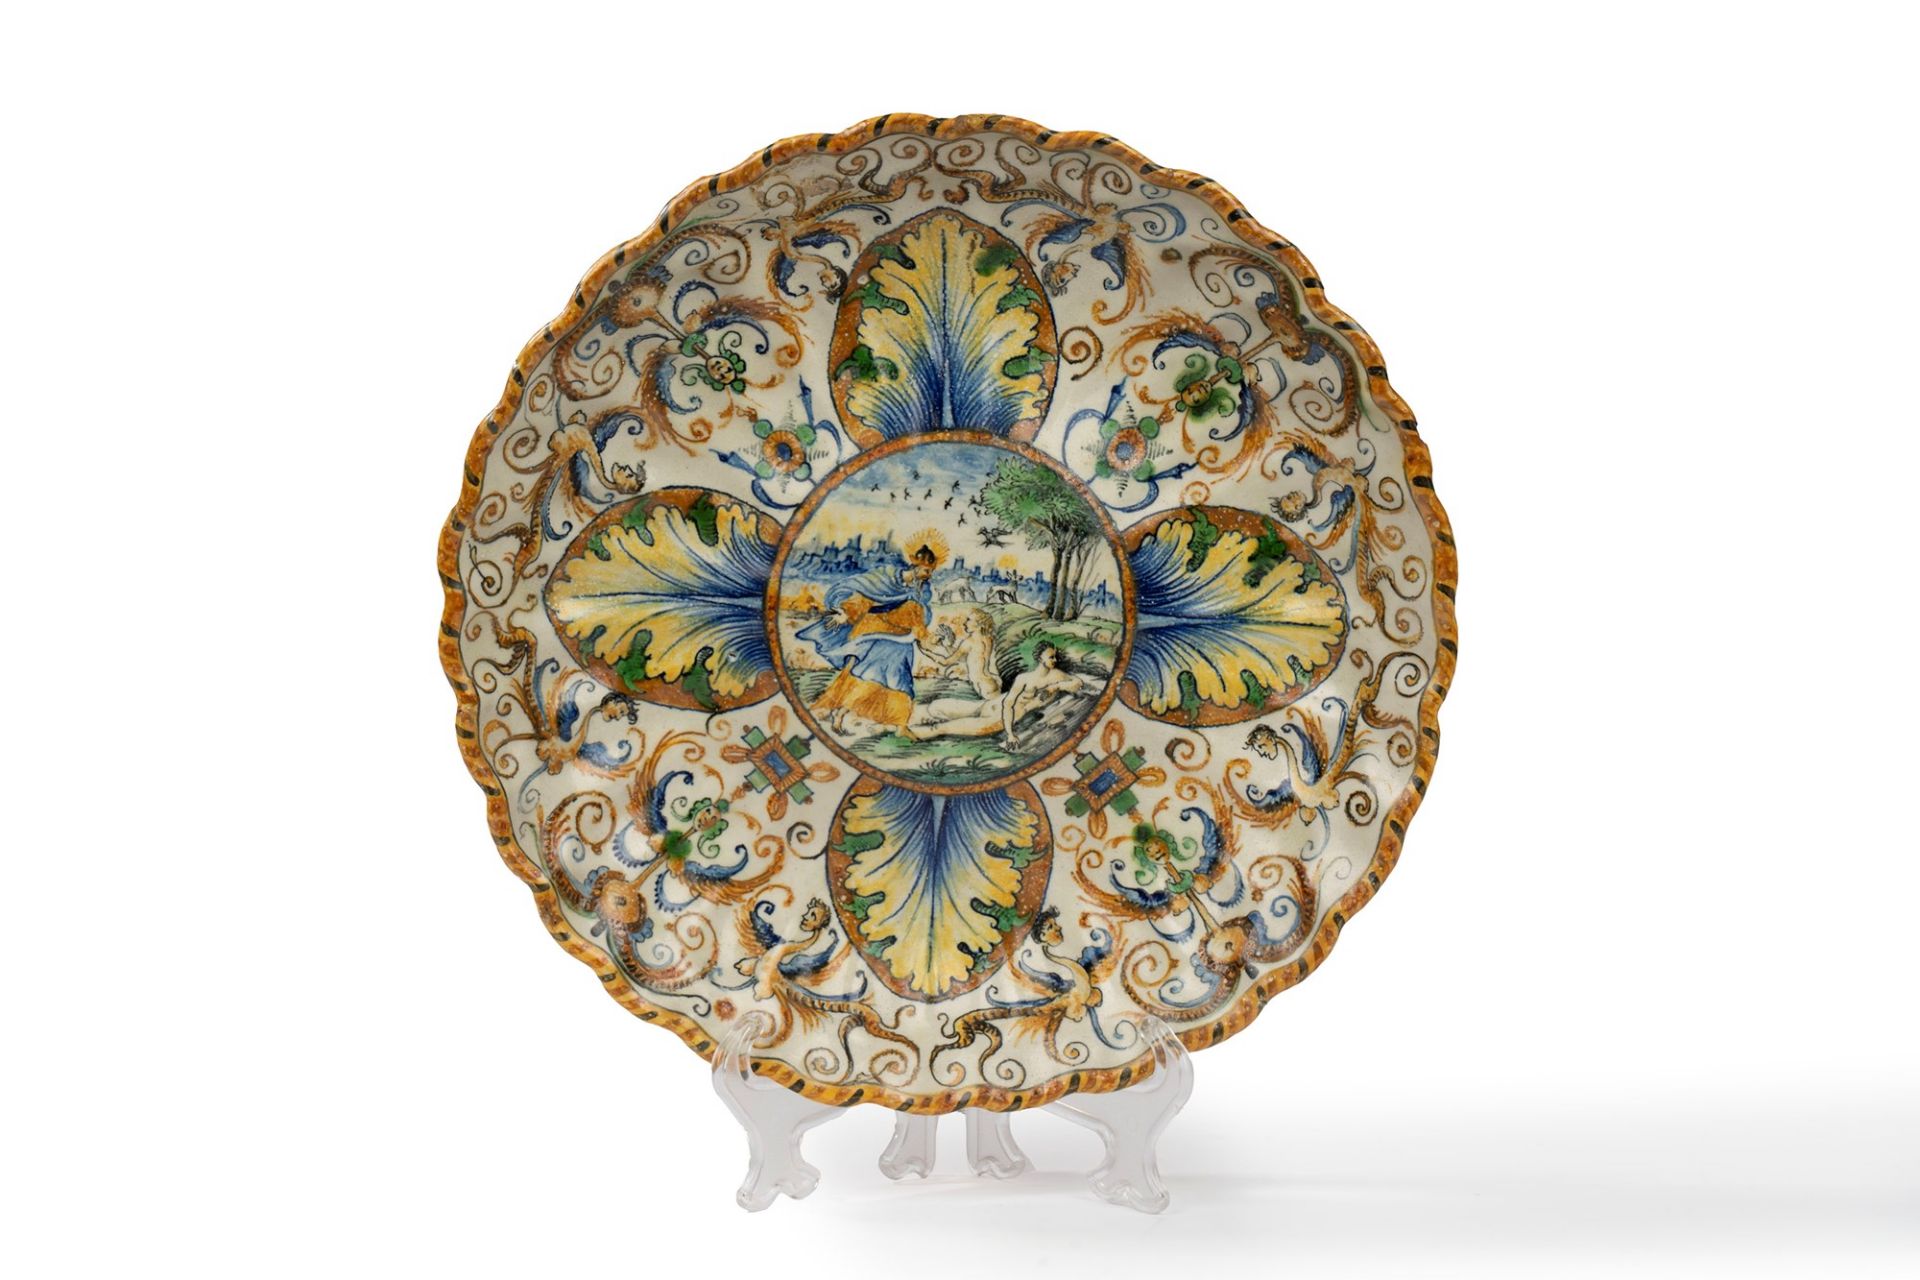 Neo-Renaissance-style majolica crespina representing the Creation of Eve, 18th century